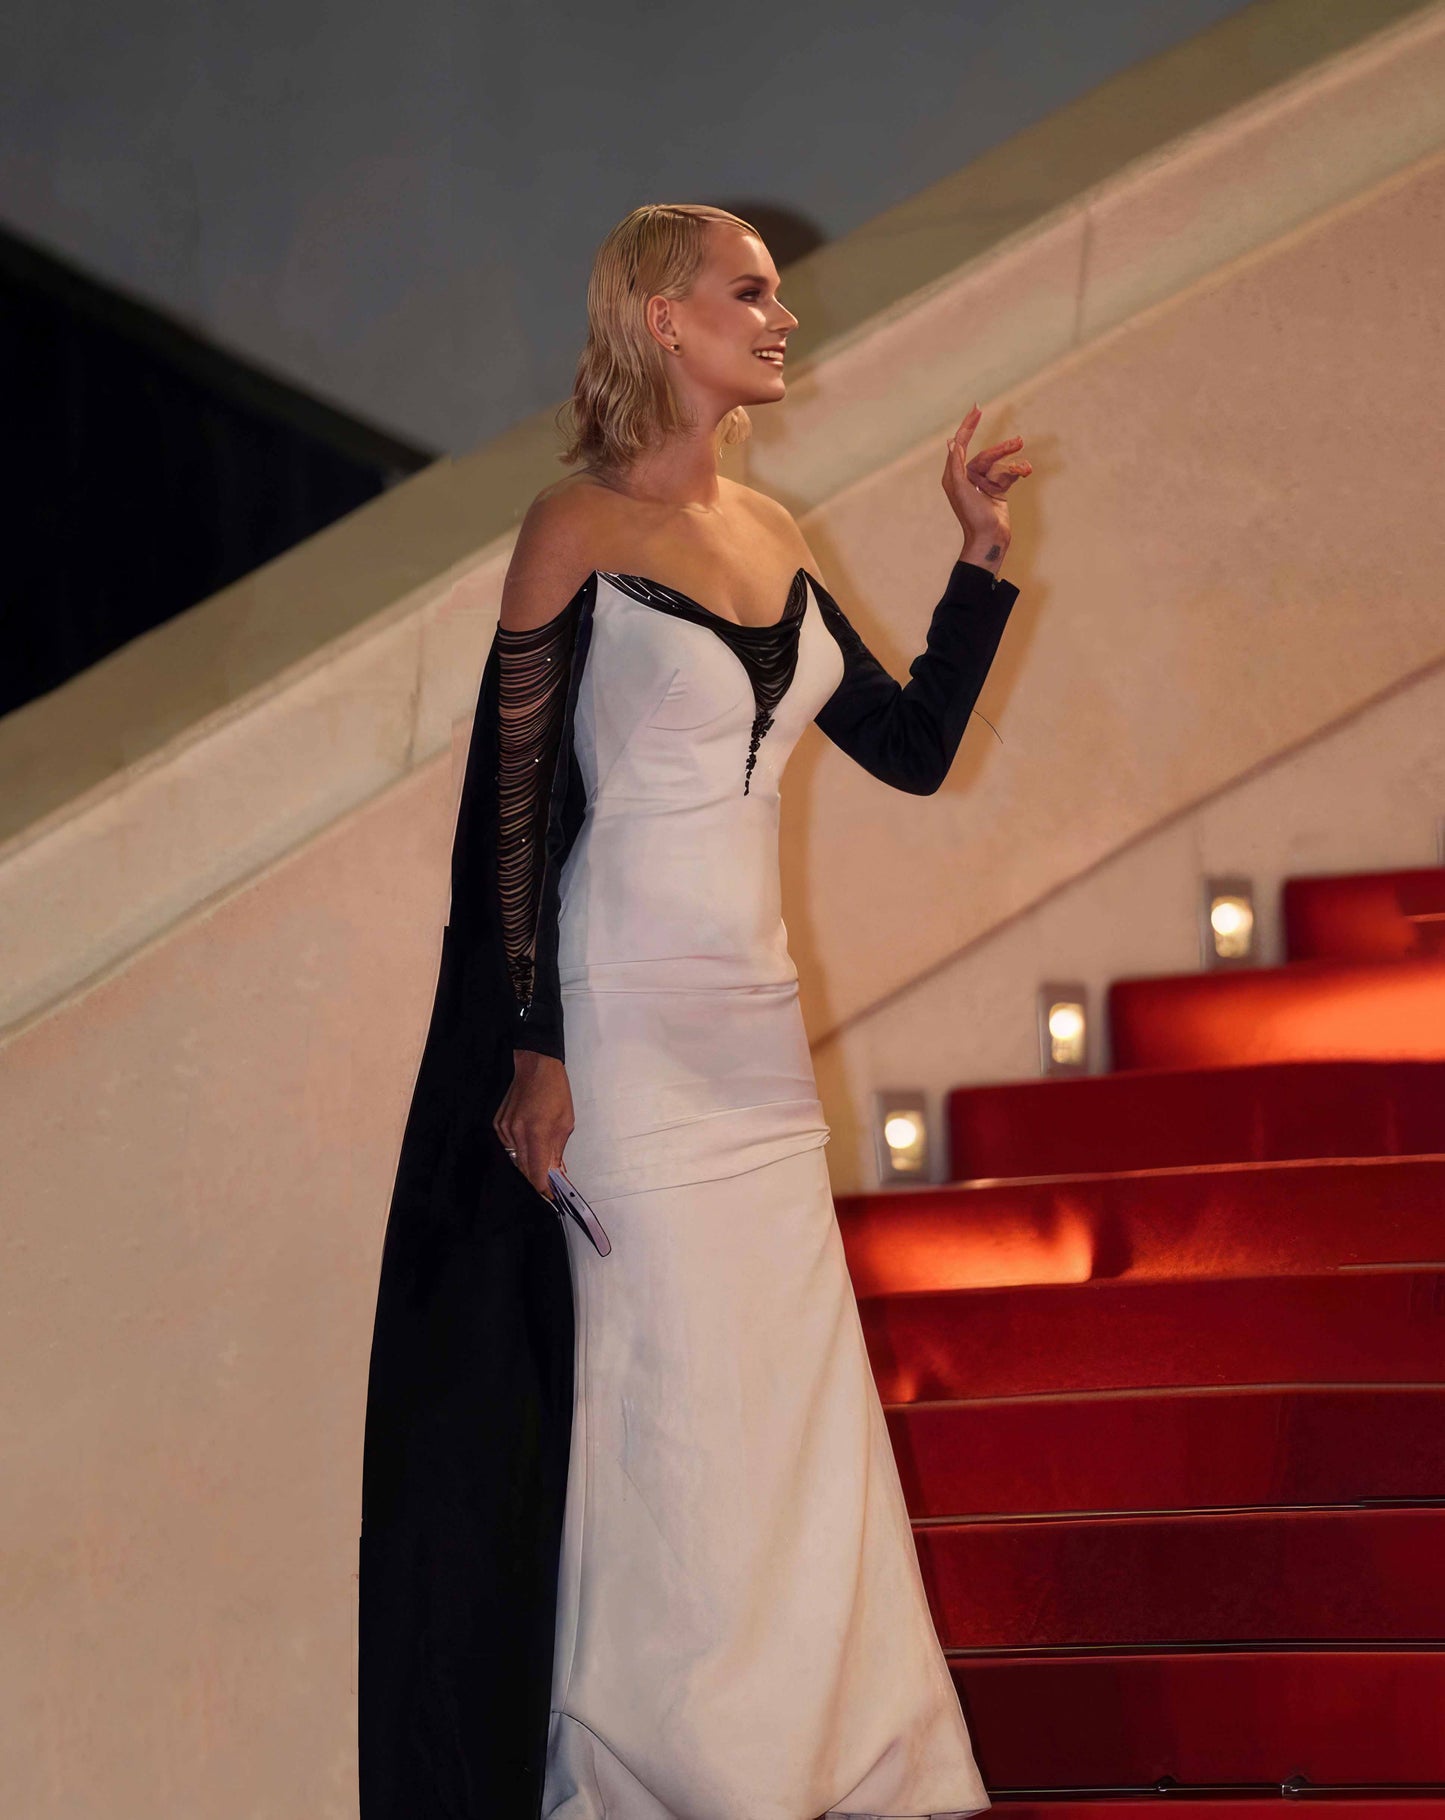 Gattinolli By Marwan- Dress-Couture-Haute Couture- Ready to wear- RTW- Collection- Cannes Film Festival- Luxury - Fashion